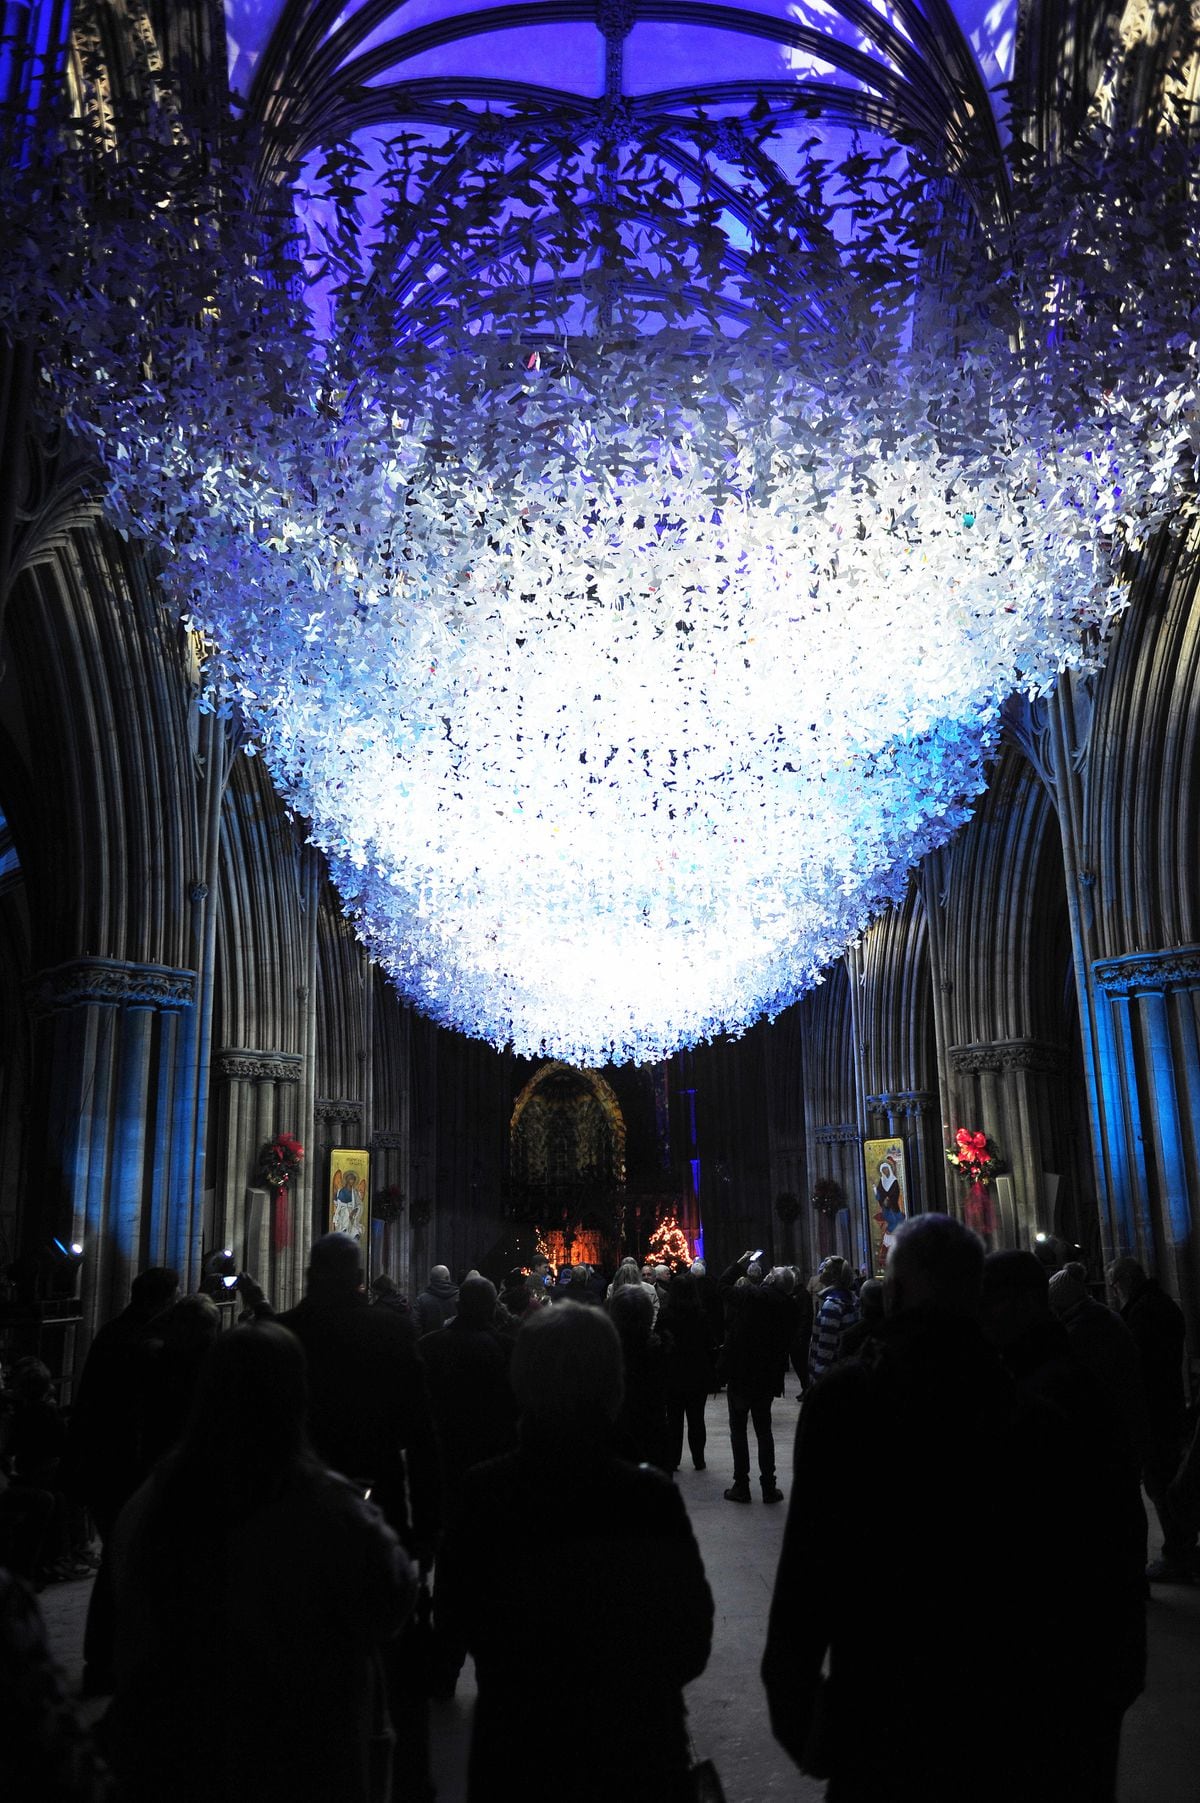 Lichfield Cathedral 70000 paper doves are illuminated during its 'Peace on Earth' light display created by resident artist, Peter Walker, and composer, David Harper, working in collaboration as Luxmuralis in Lichfield